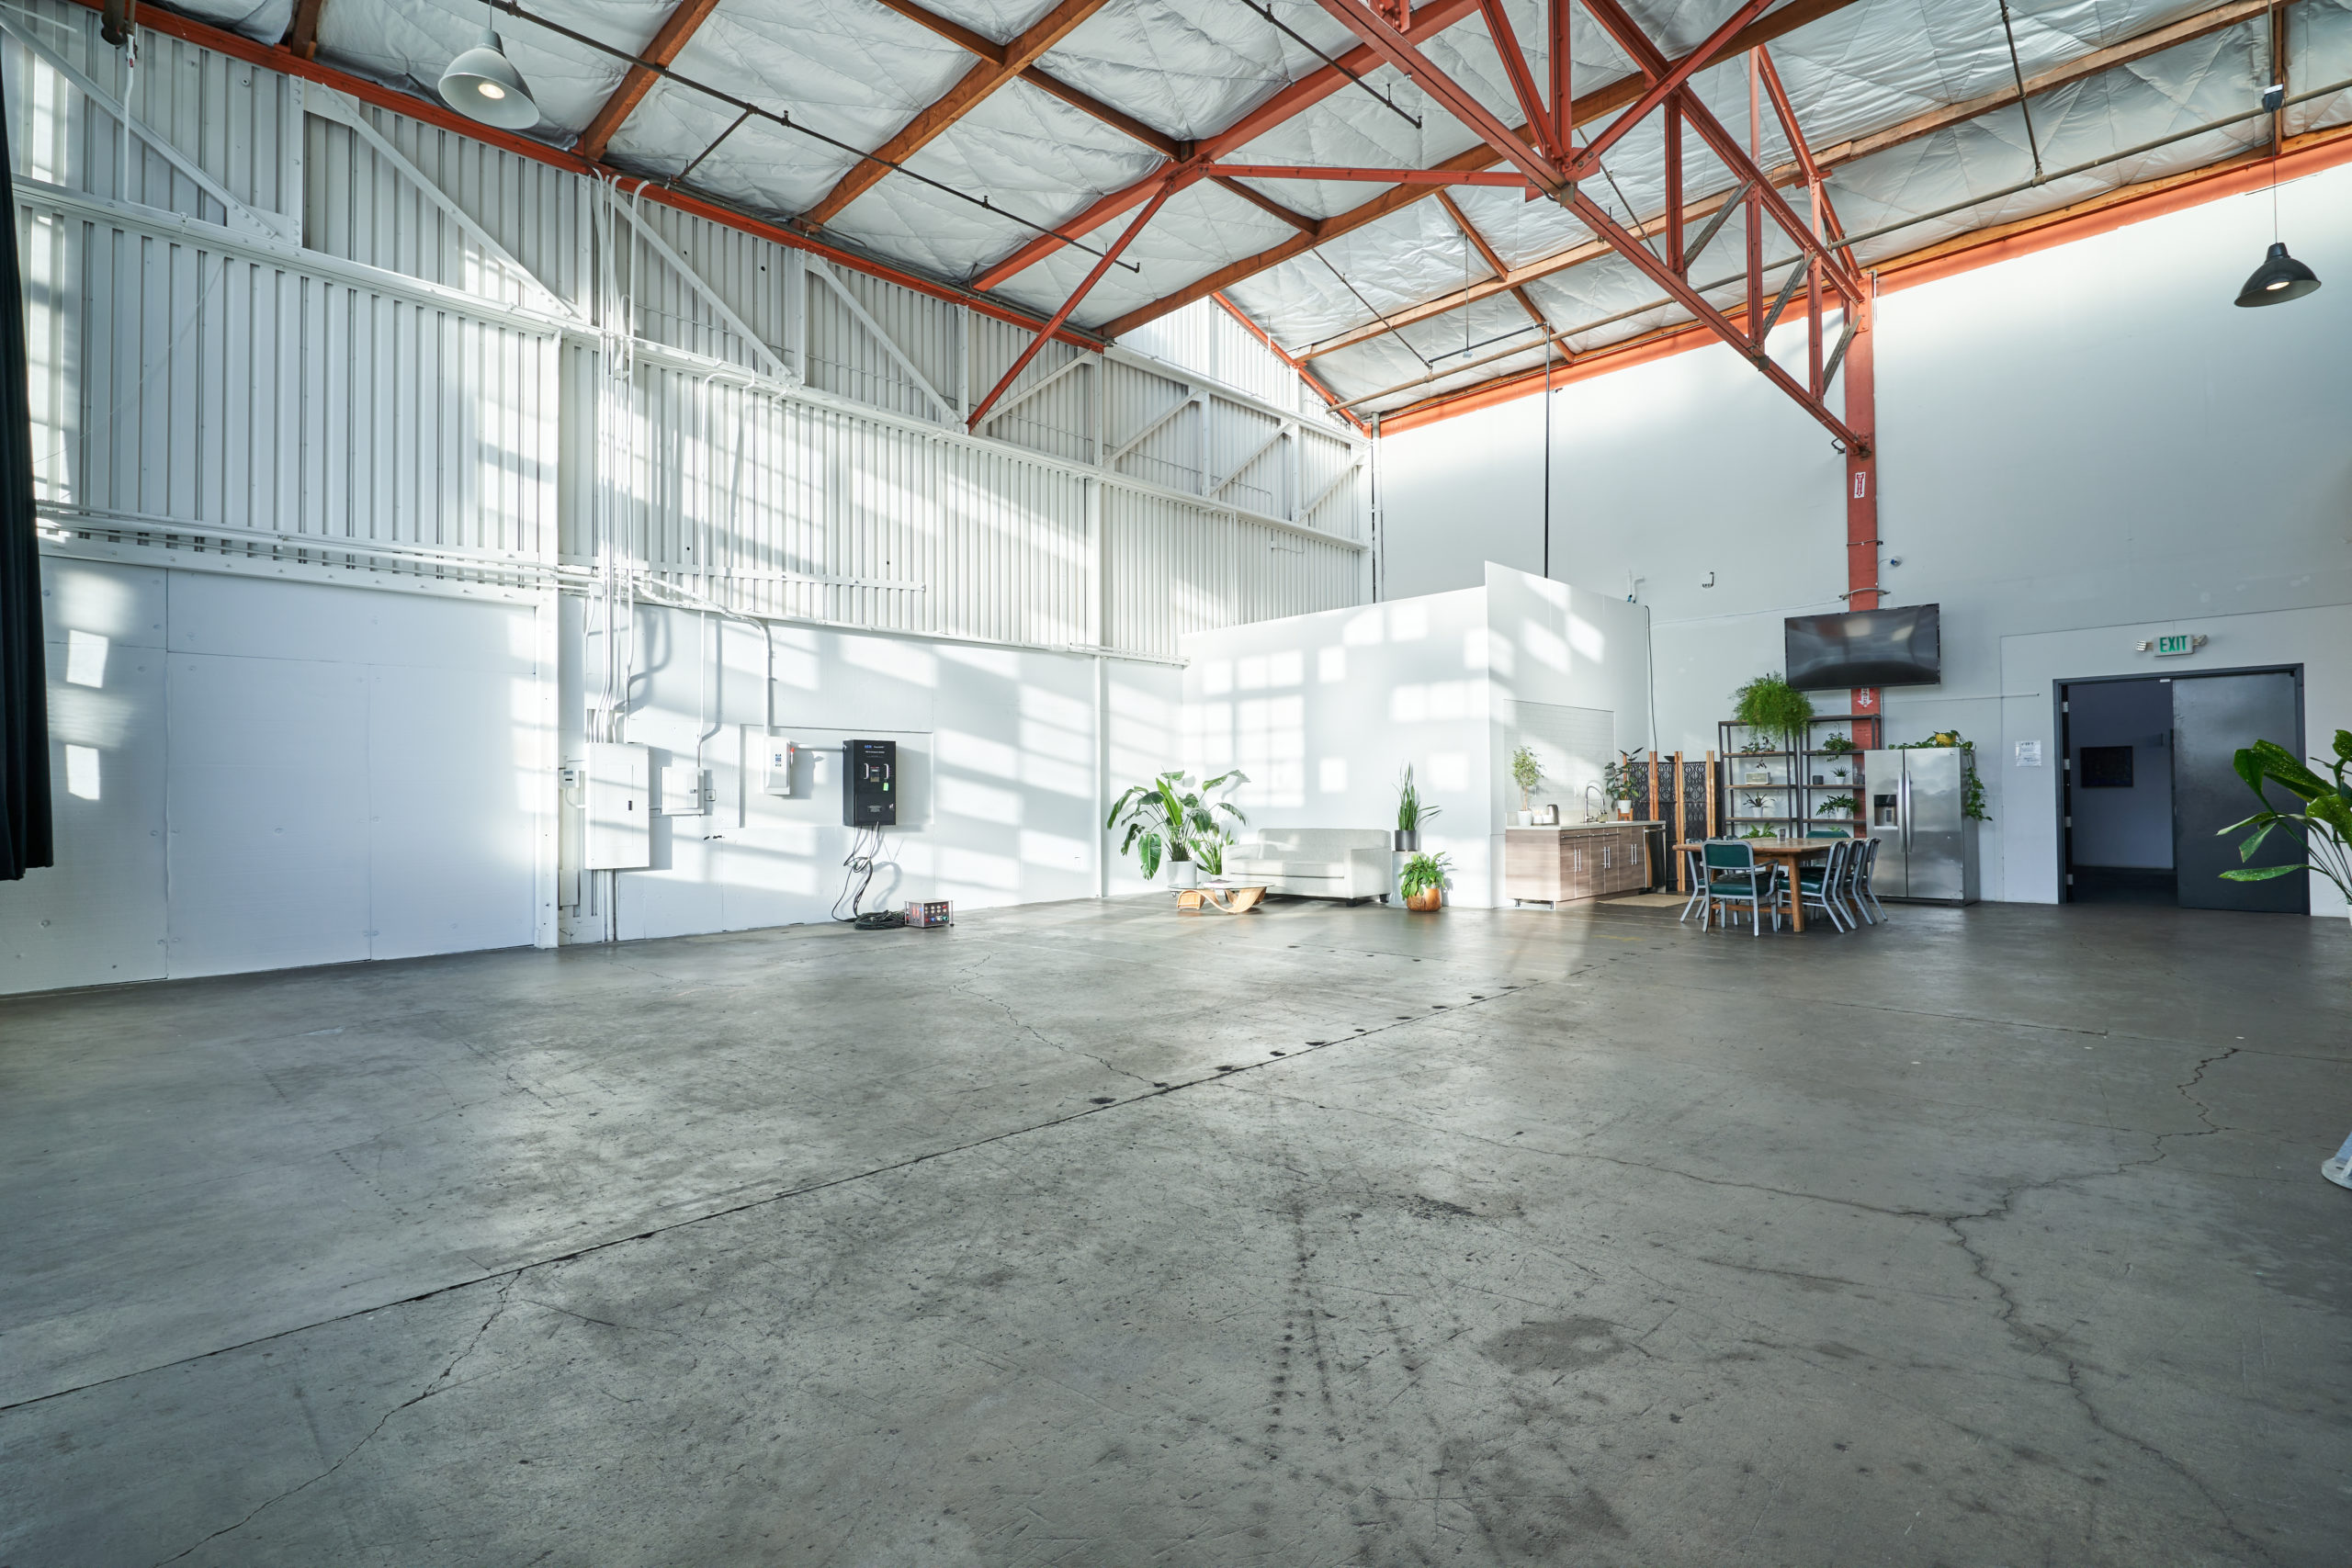 This view of Studio 8 shows how wide open this creative studio space for rent is. Highlights include a ceiling with orange beams, a kitchen, a TV, a fridge, and a large doorway.